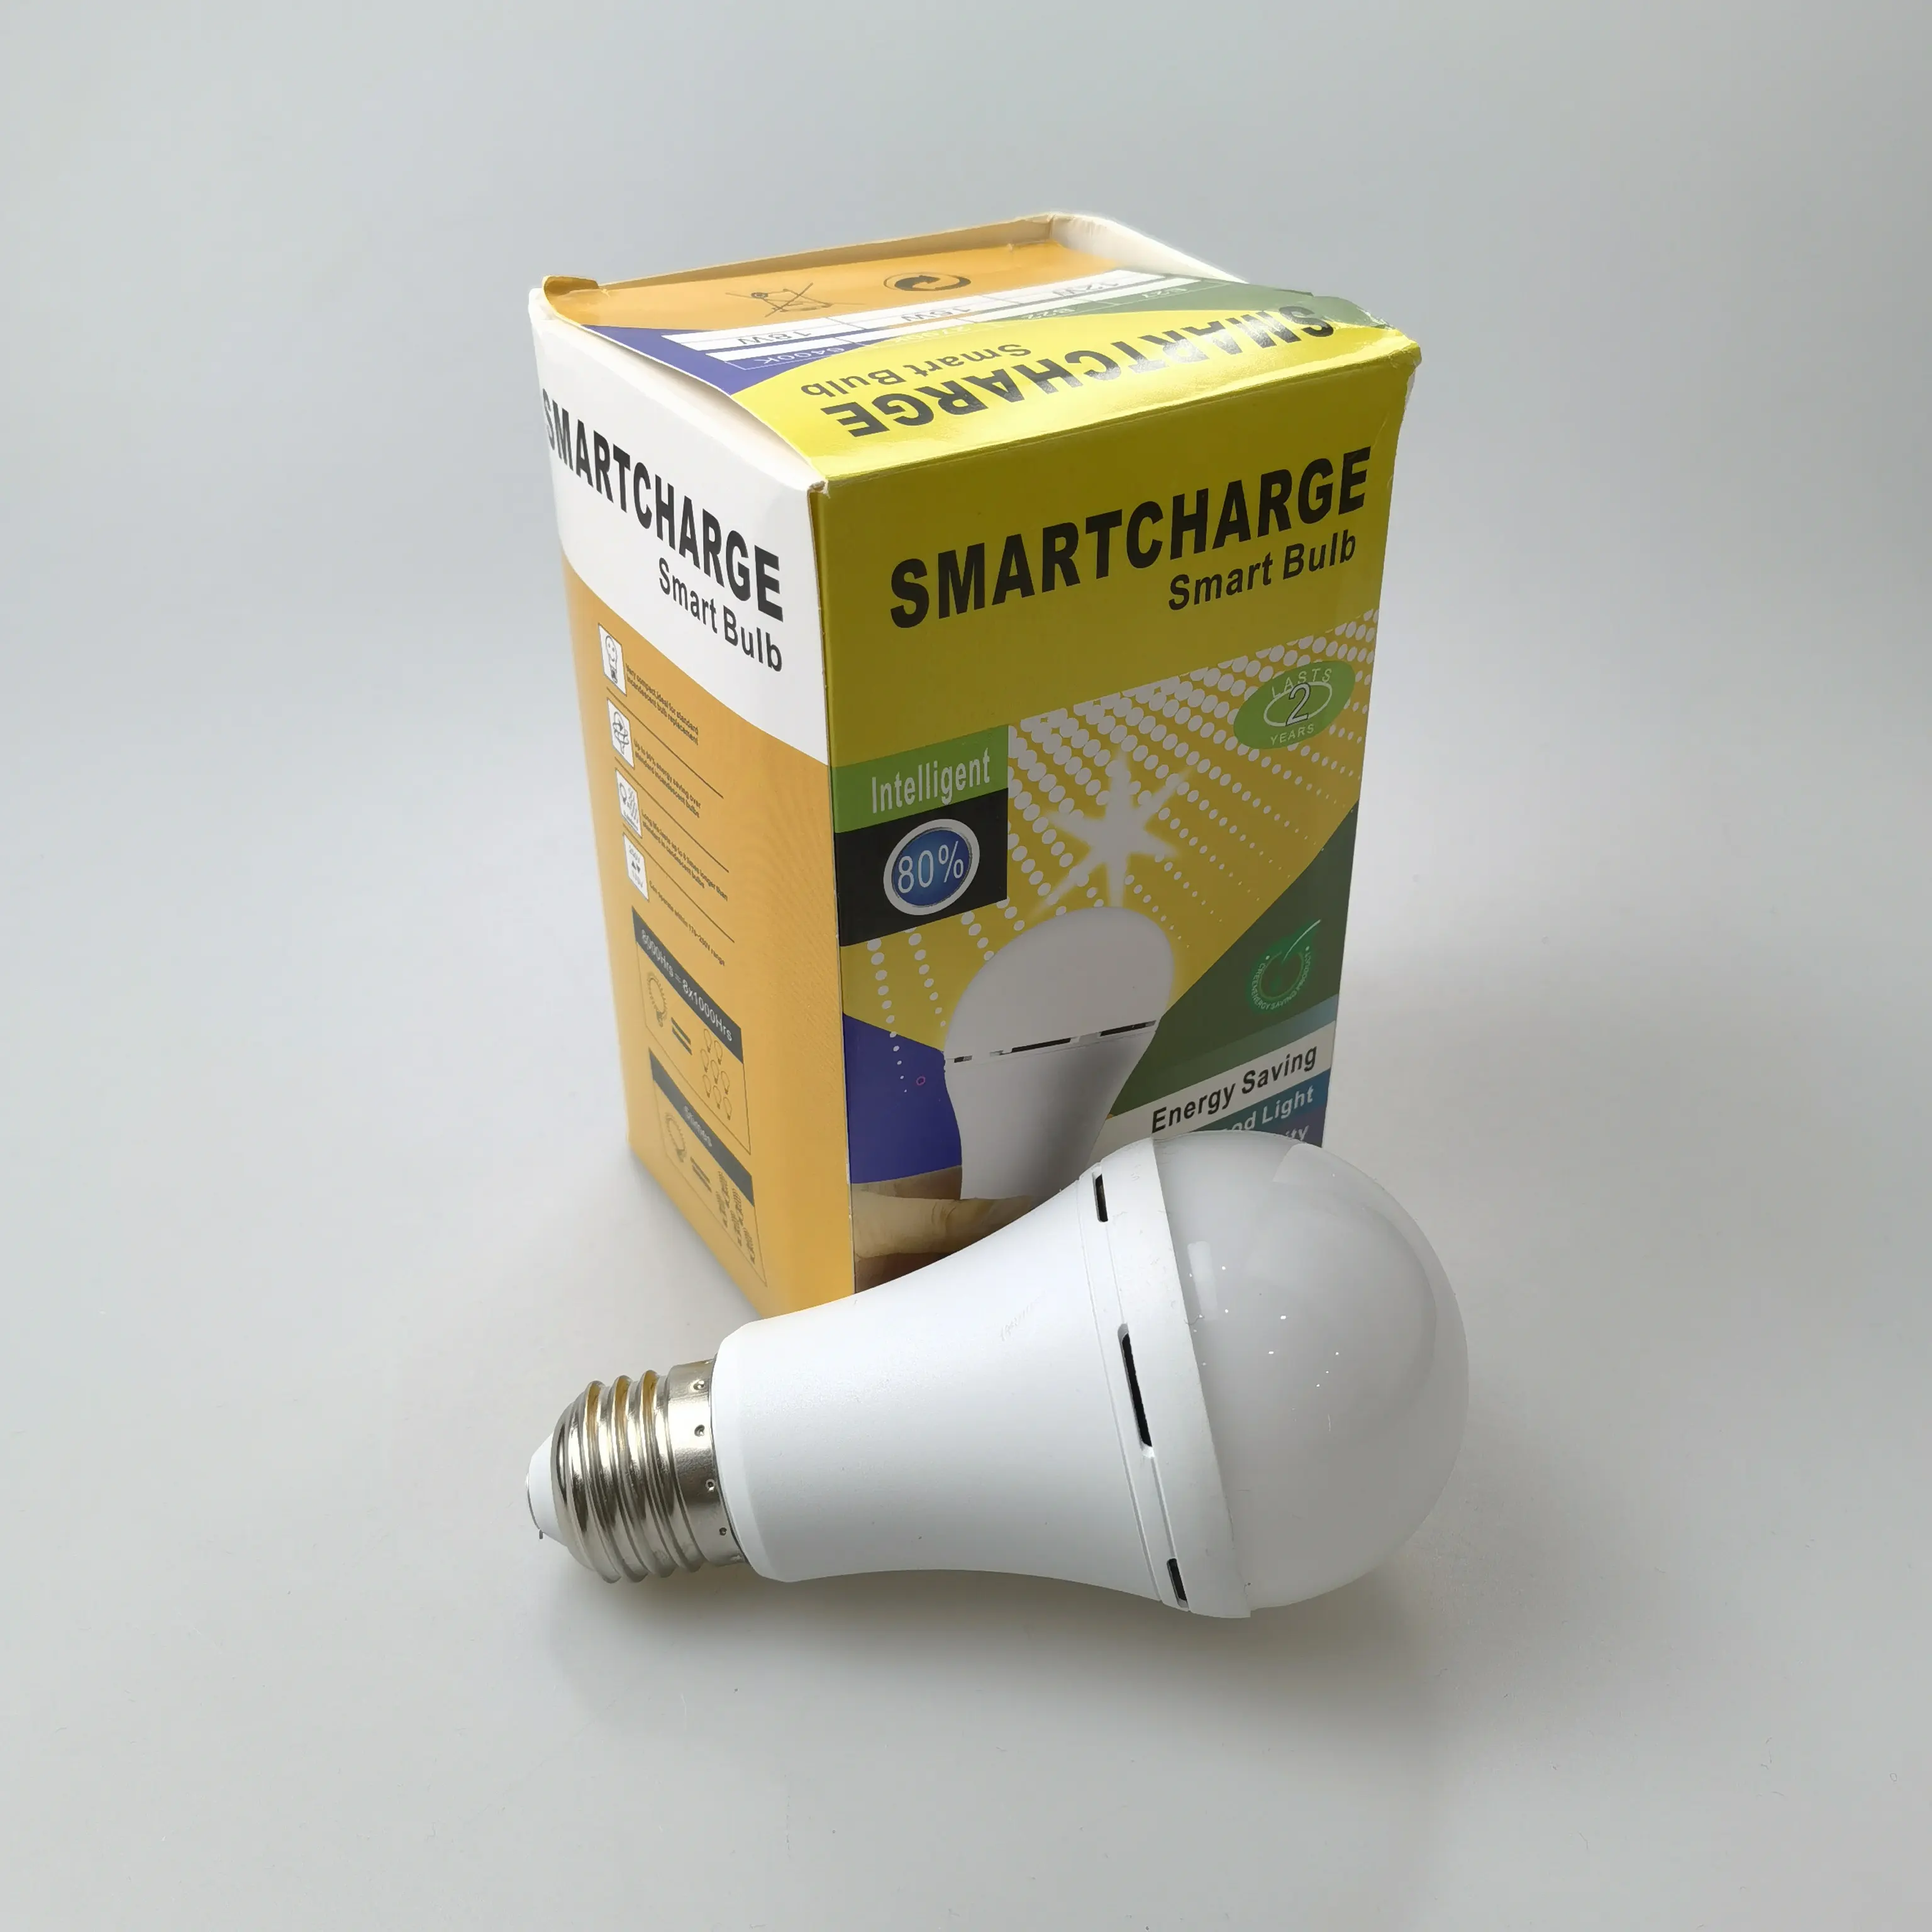 LED bulb household rechargeable 18W white pc cover wholesale Good Quality Lampadas Led Bulb Lights emergency light